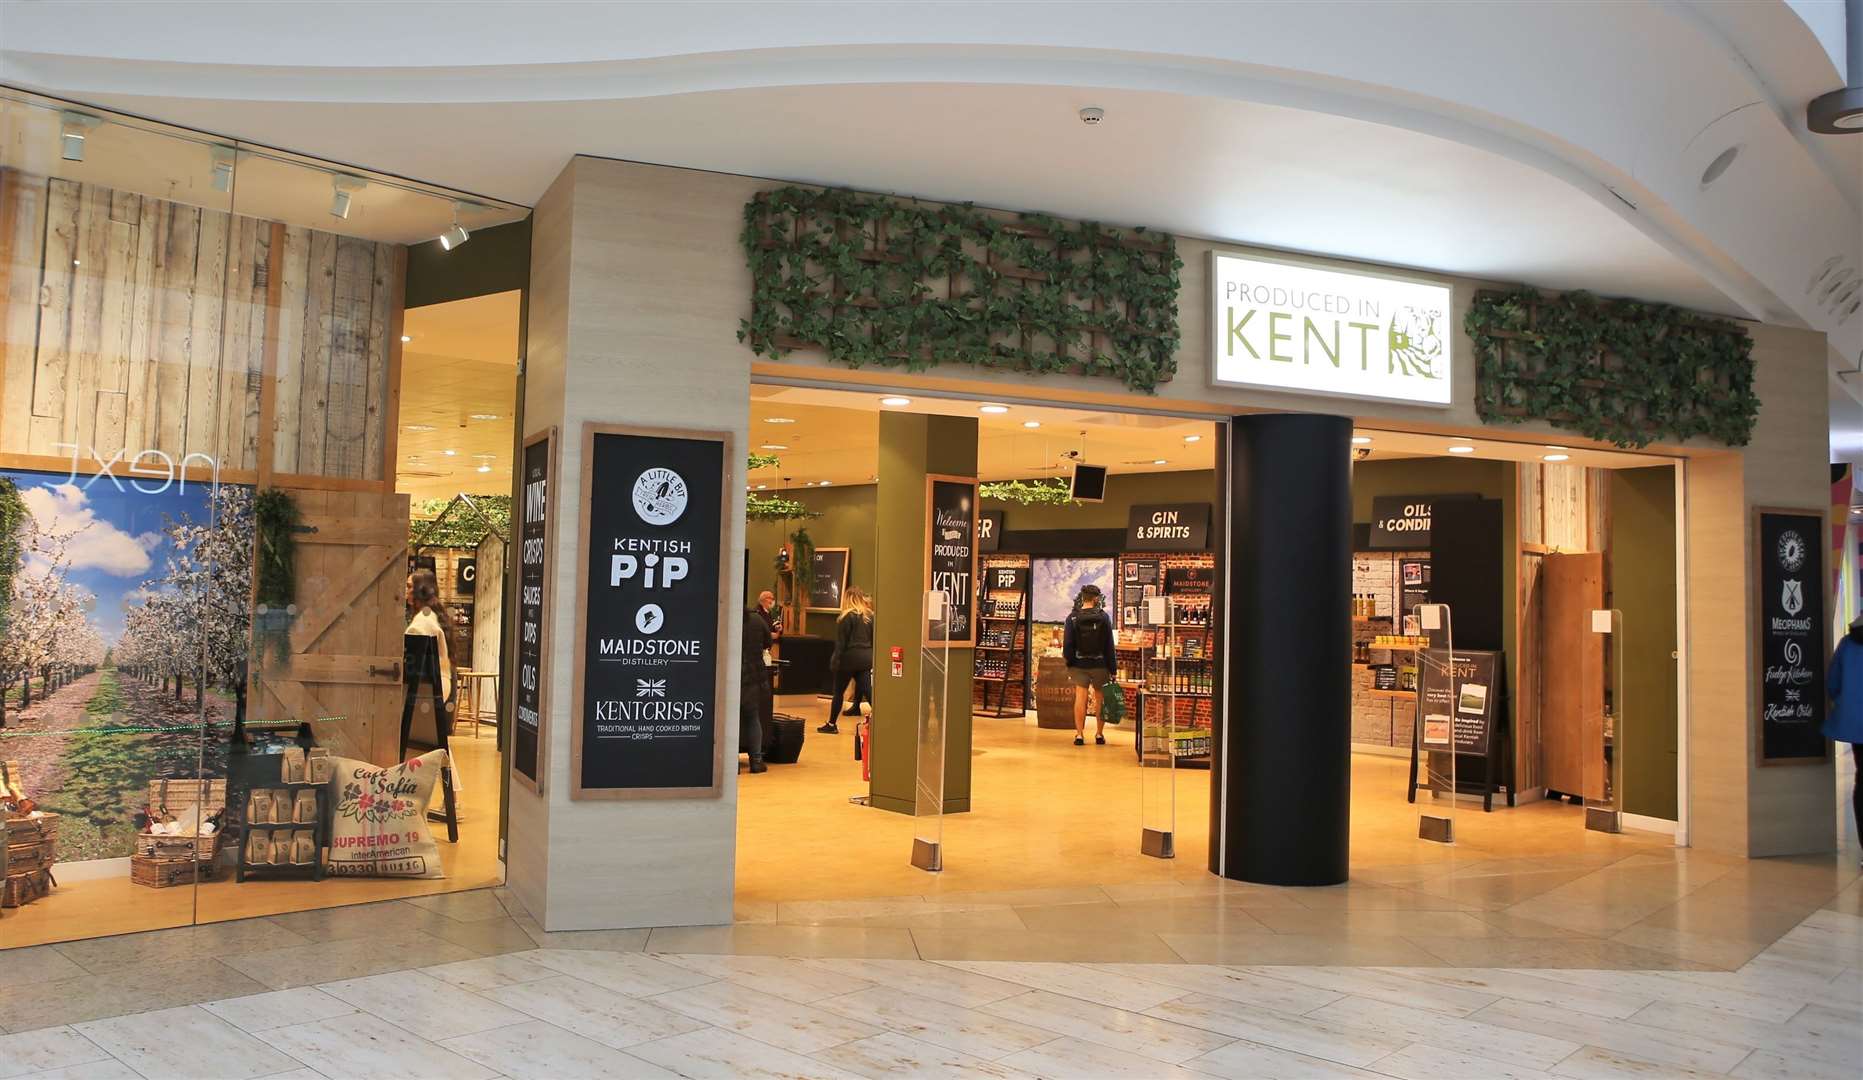 The Produced in Kent shop at Bluewater is now closed